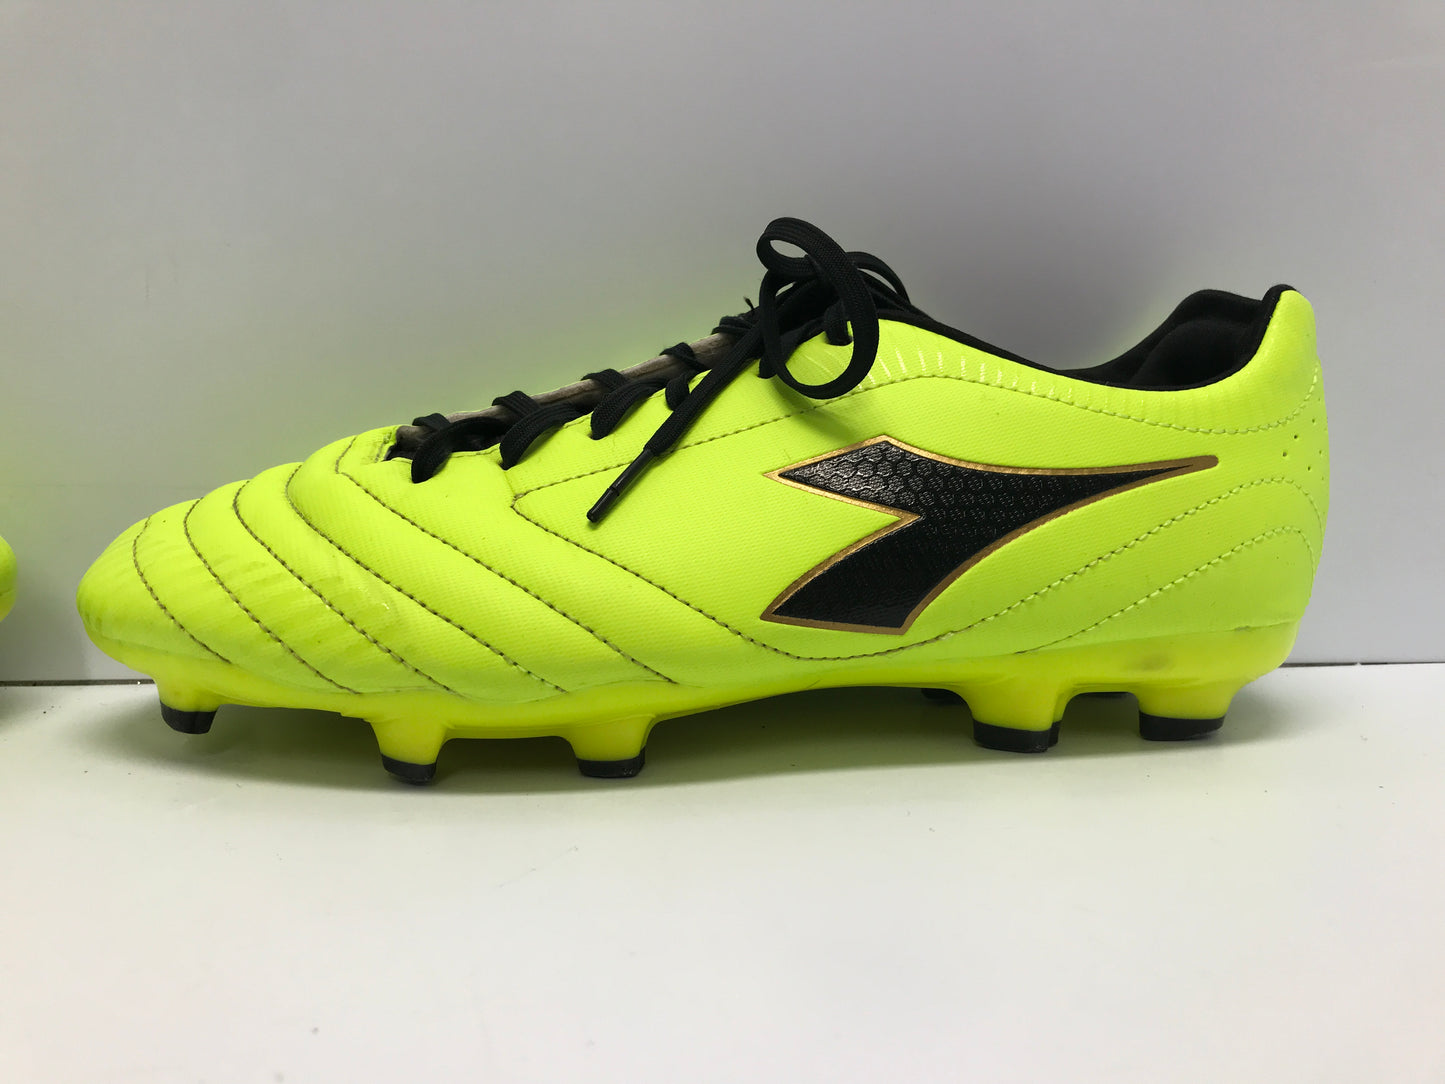 Soccer Shoes Cleats Men's Size 9.5 Diadora Lime Black Like New Outstanding Quality